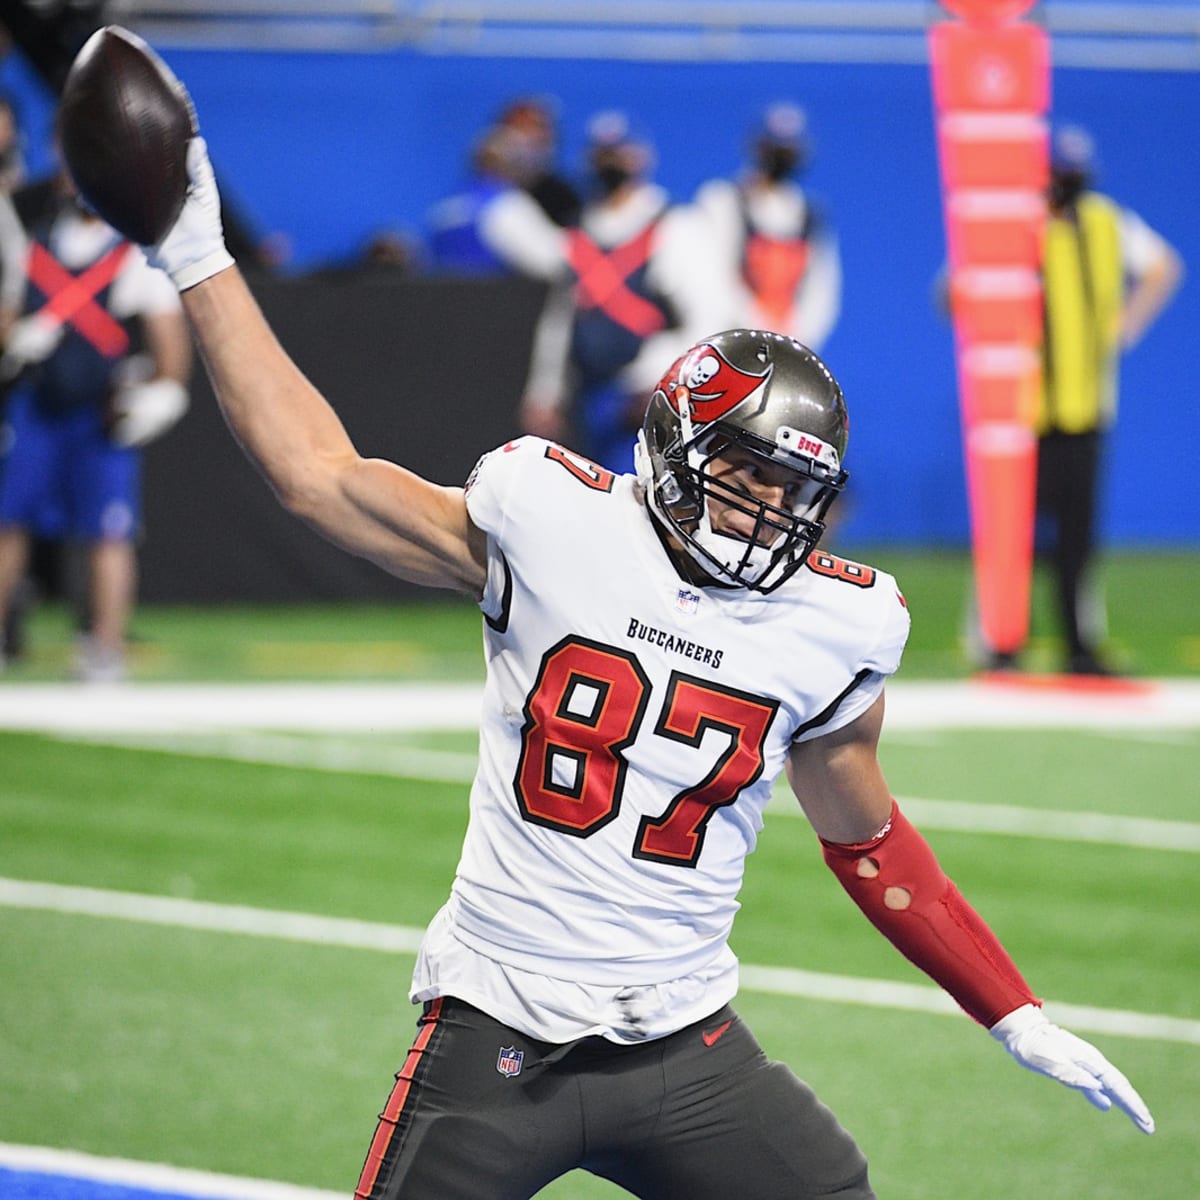 Bucs' Rob Gronkowski makes Super Bowl history with first reception